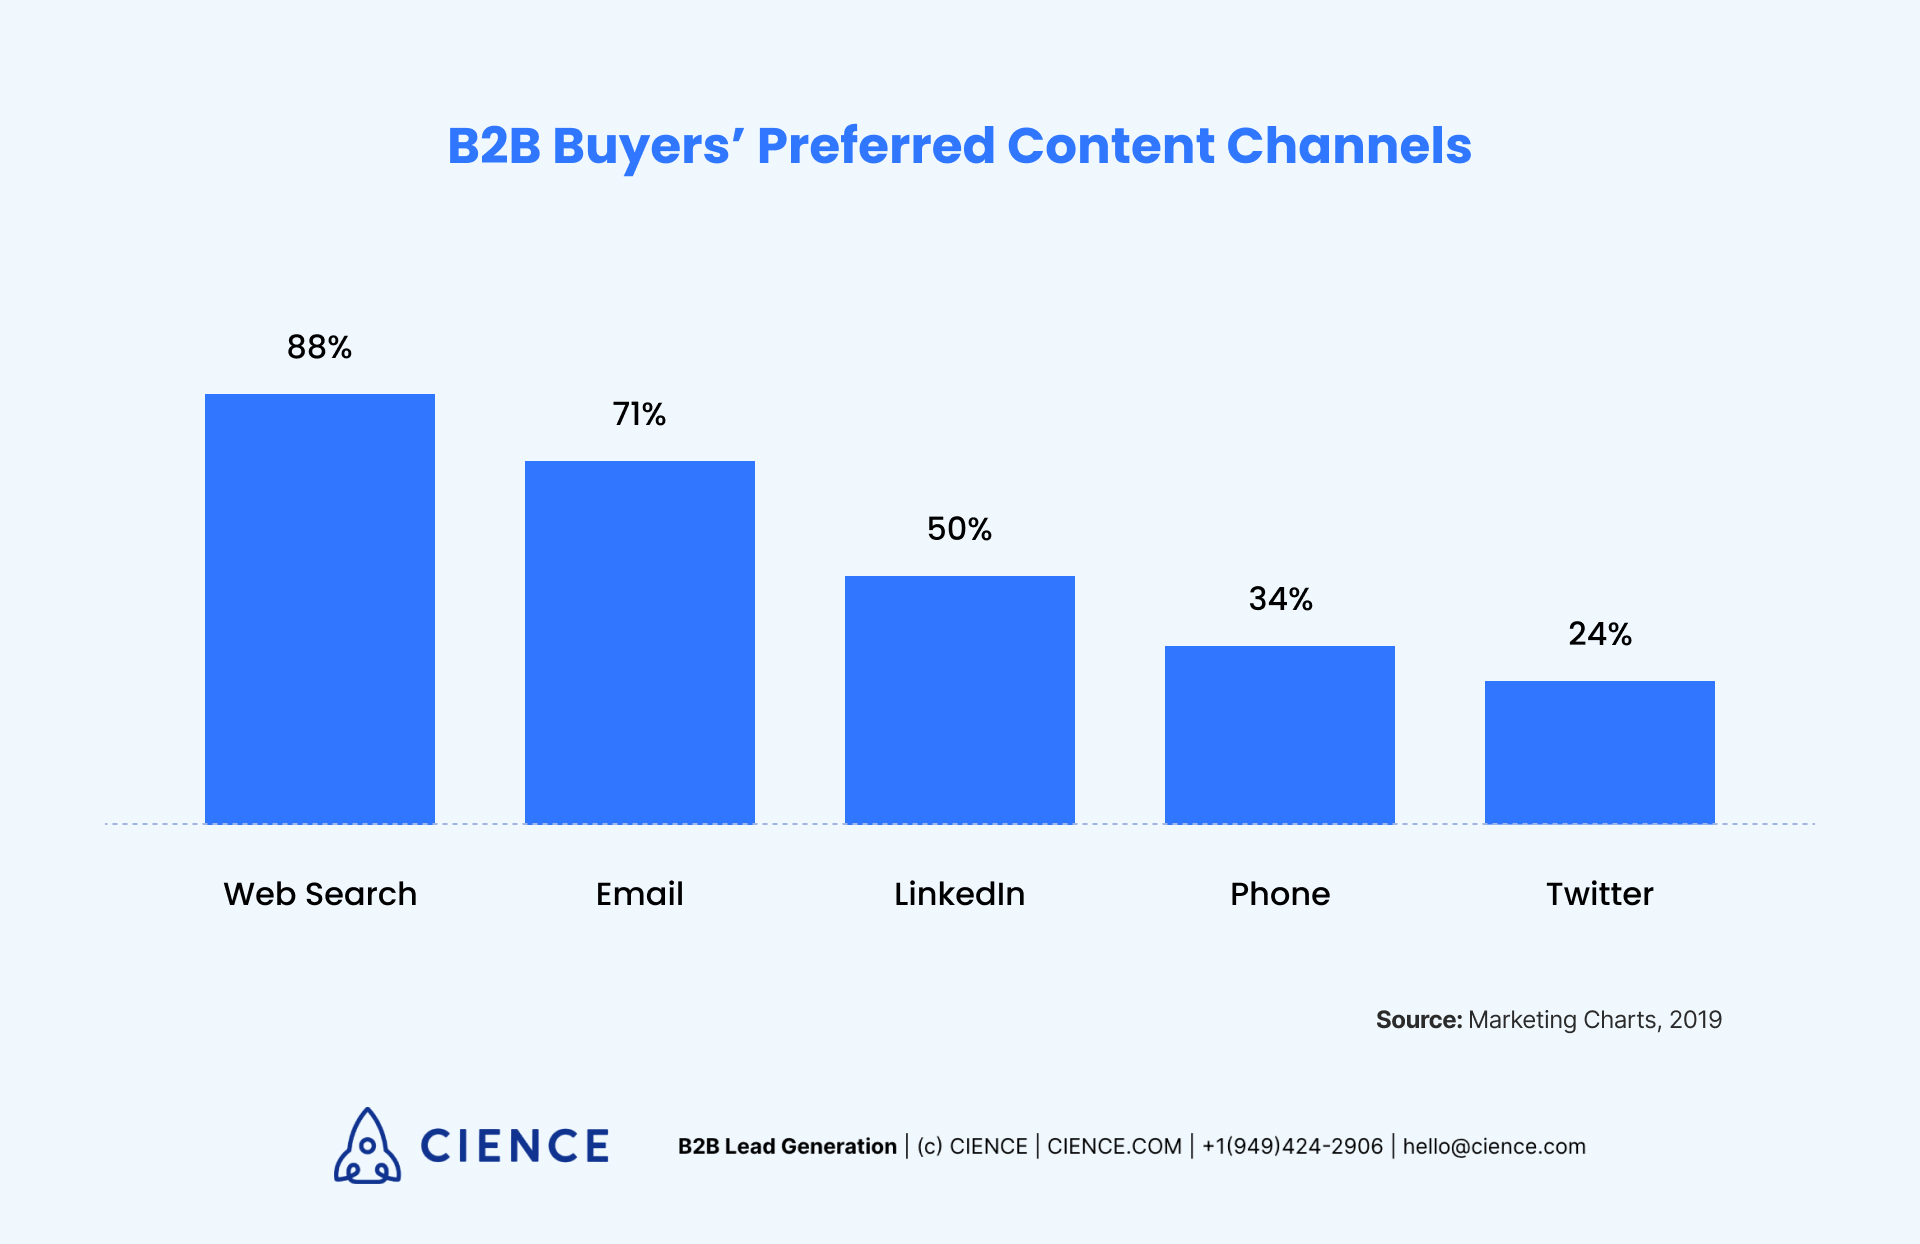 B2B Buyers Preferred Content Channels